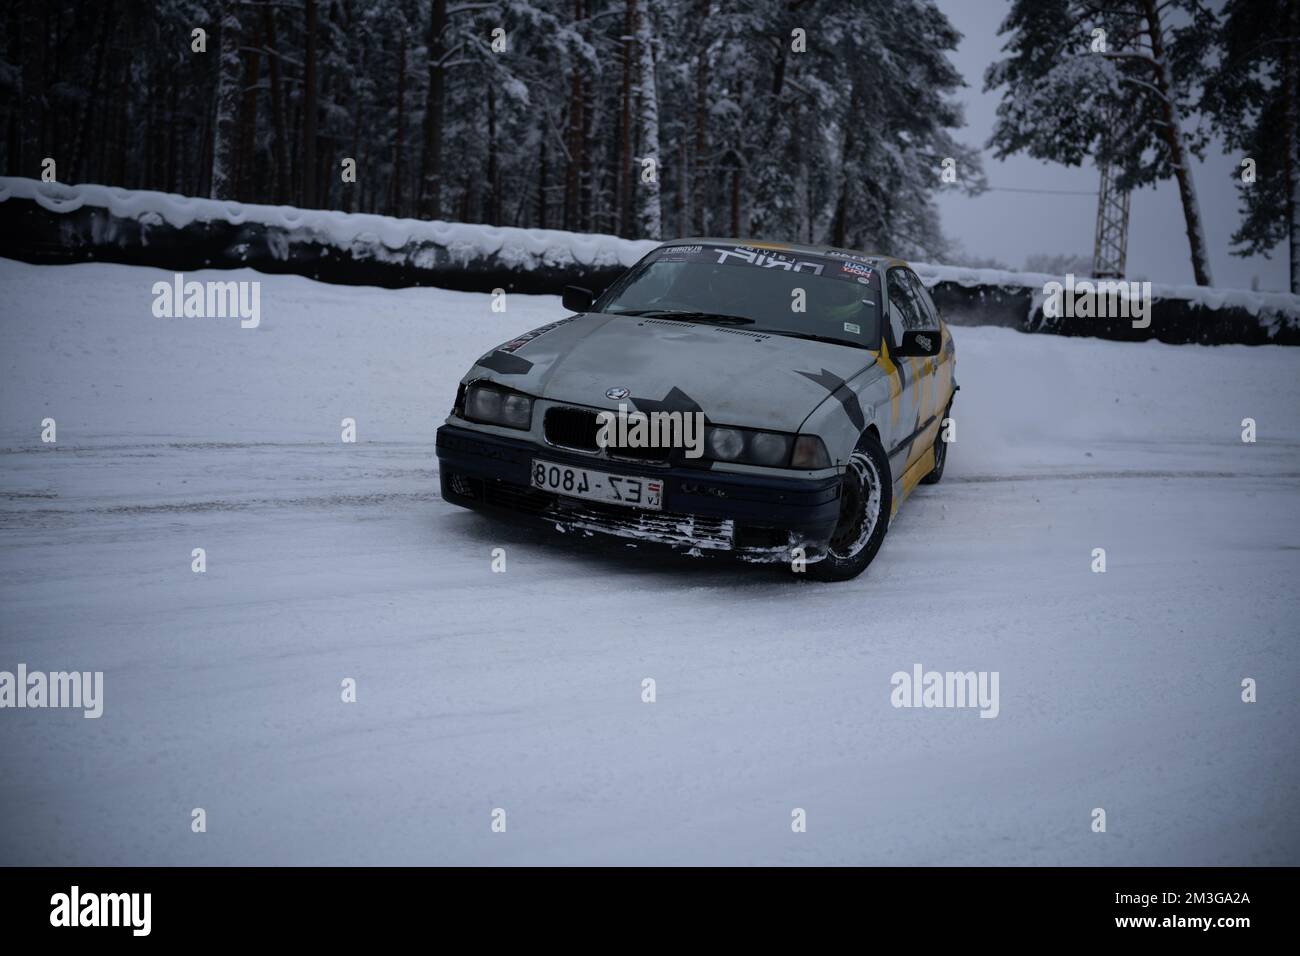 12-12-2022 Riga, Latvia  a car is driving through the snow in the woods on a road with trees in the background and a yellow and black stripe on the fr Stock Photo